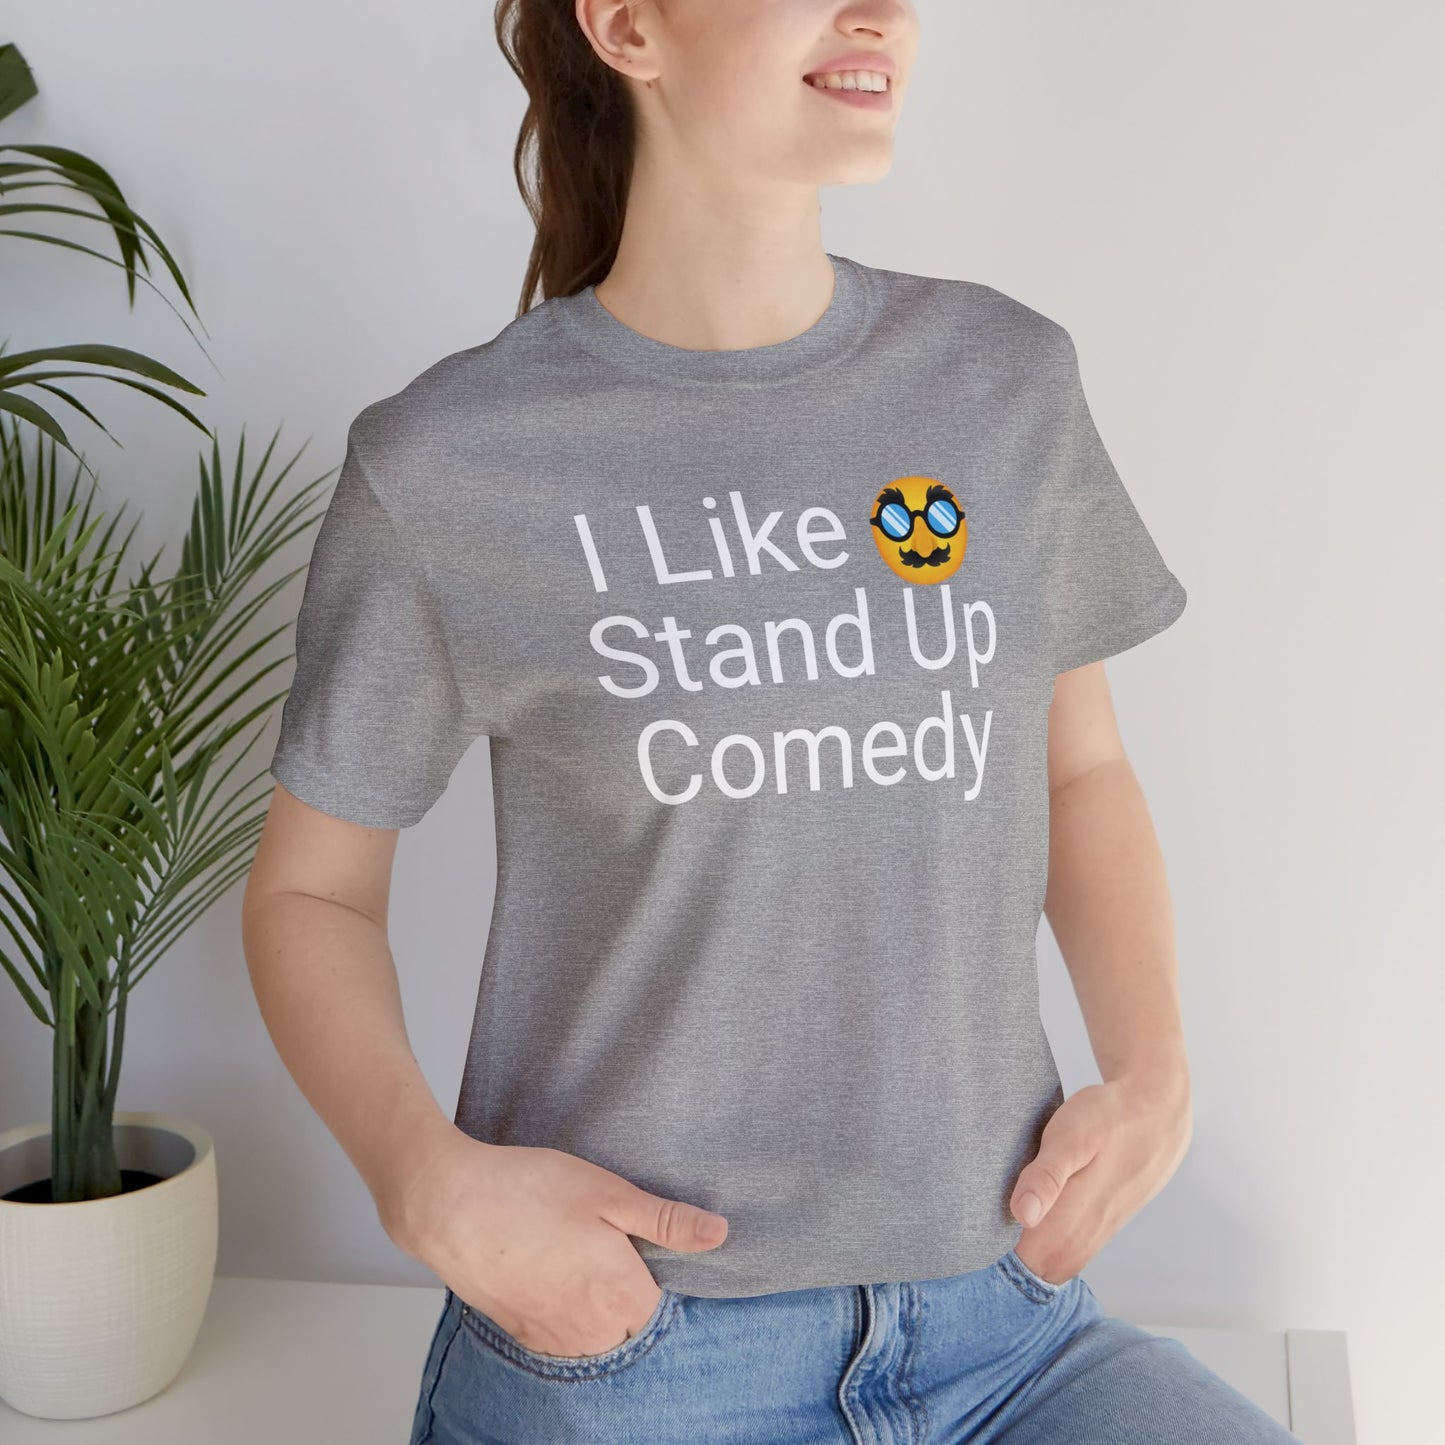 Comedians Comedy Enthusiasts Comedy Lover Comedy Lover Apparel Comedy Show Comedy Specials Comfortable Connection Conversation Starter Cotton Crew neck Customer Satisfaction Entertainment Fun Gift Funny Jokes Humor Laughter Live Performances Quality Shared Experience Stand-Up Comedy Stylish T-shirts Unisex Wit